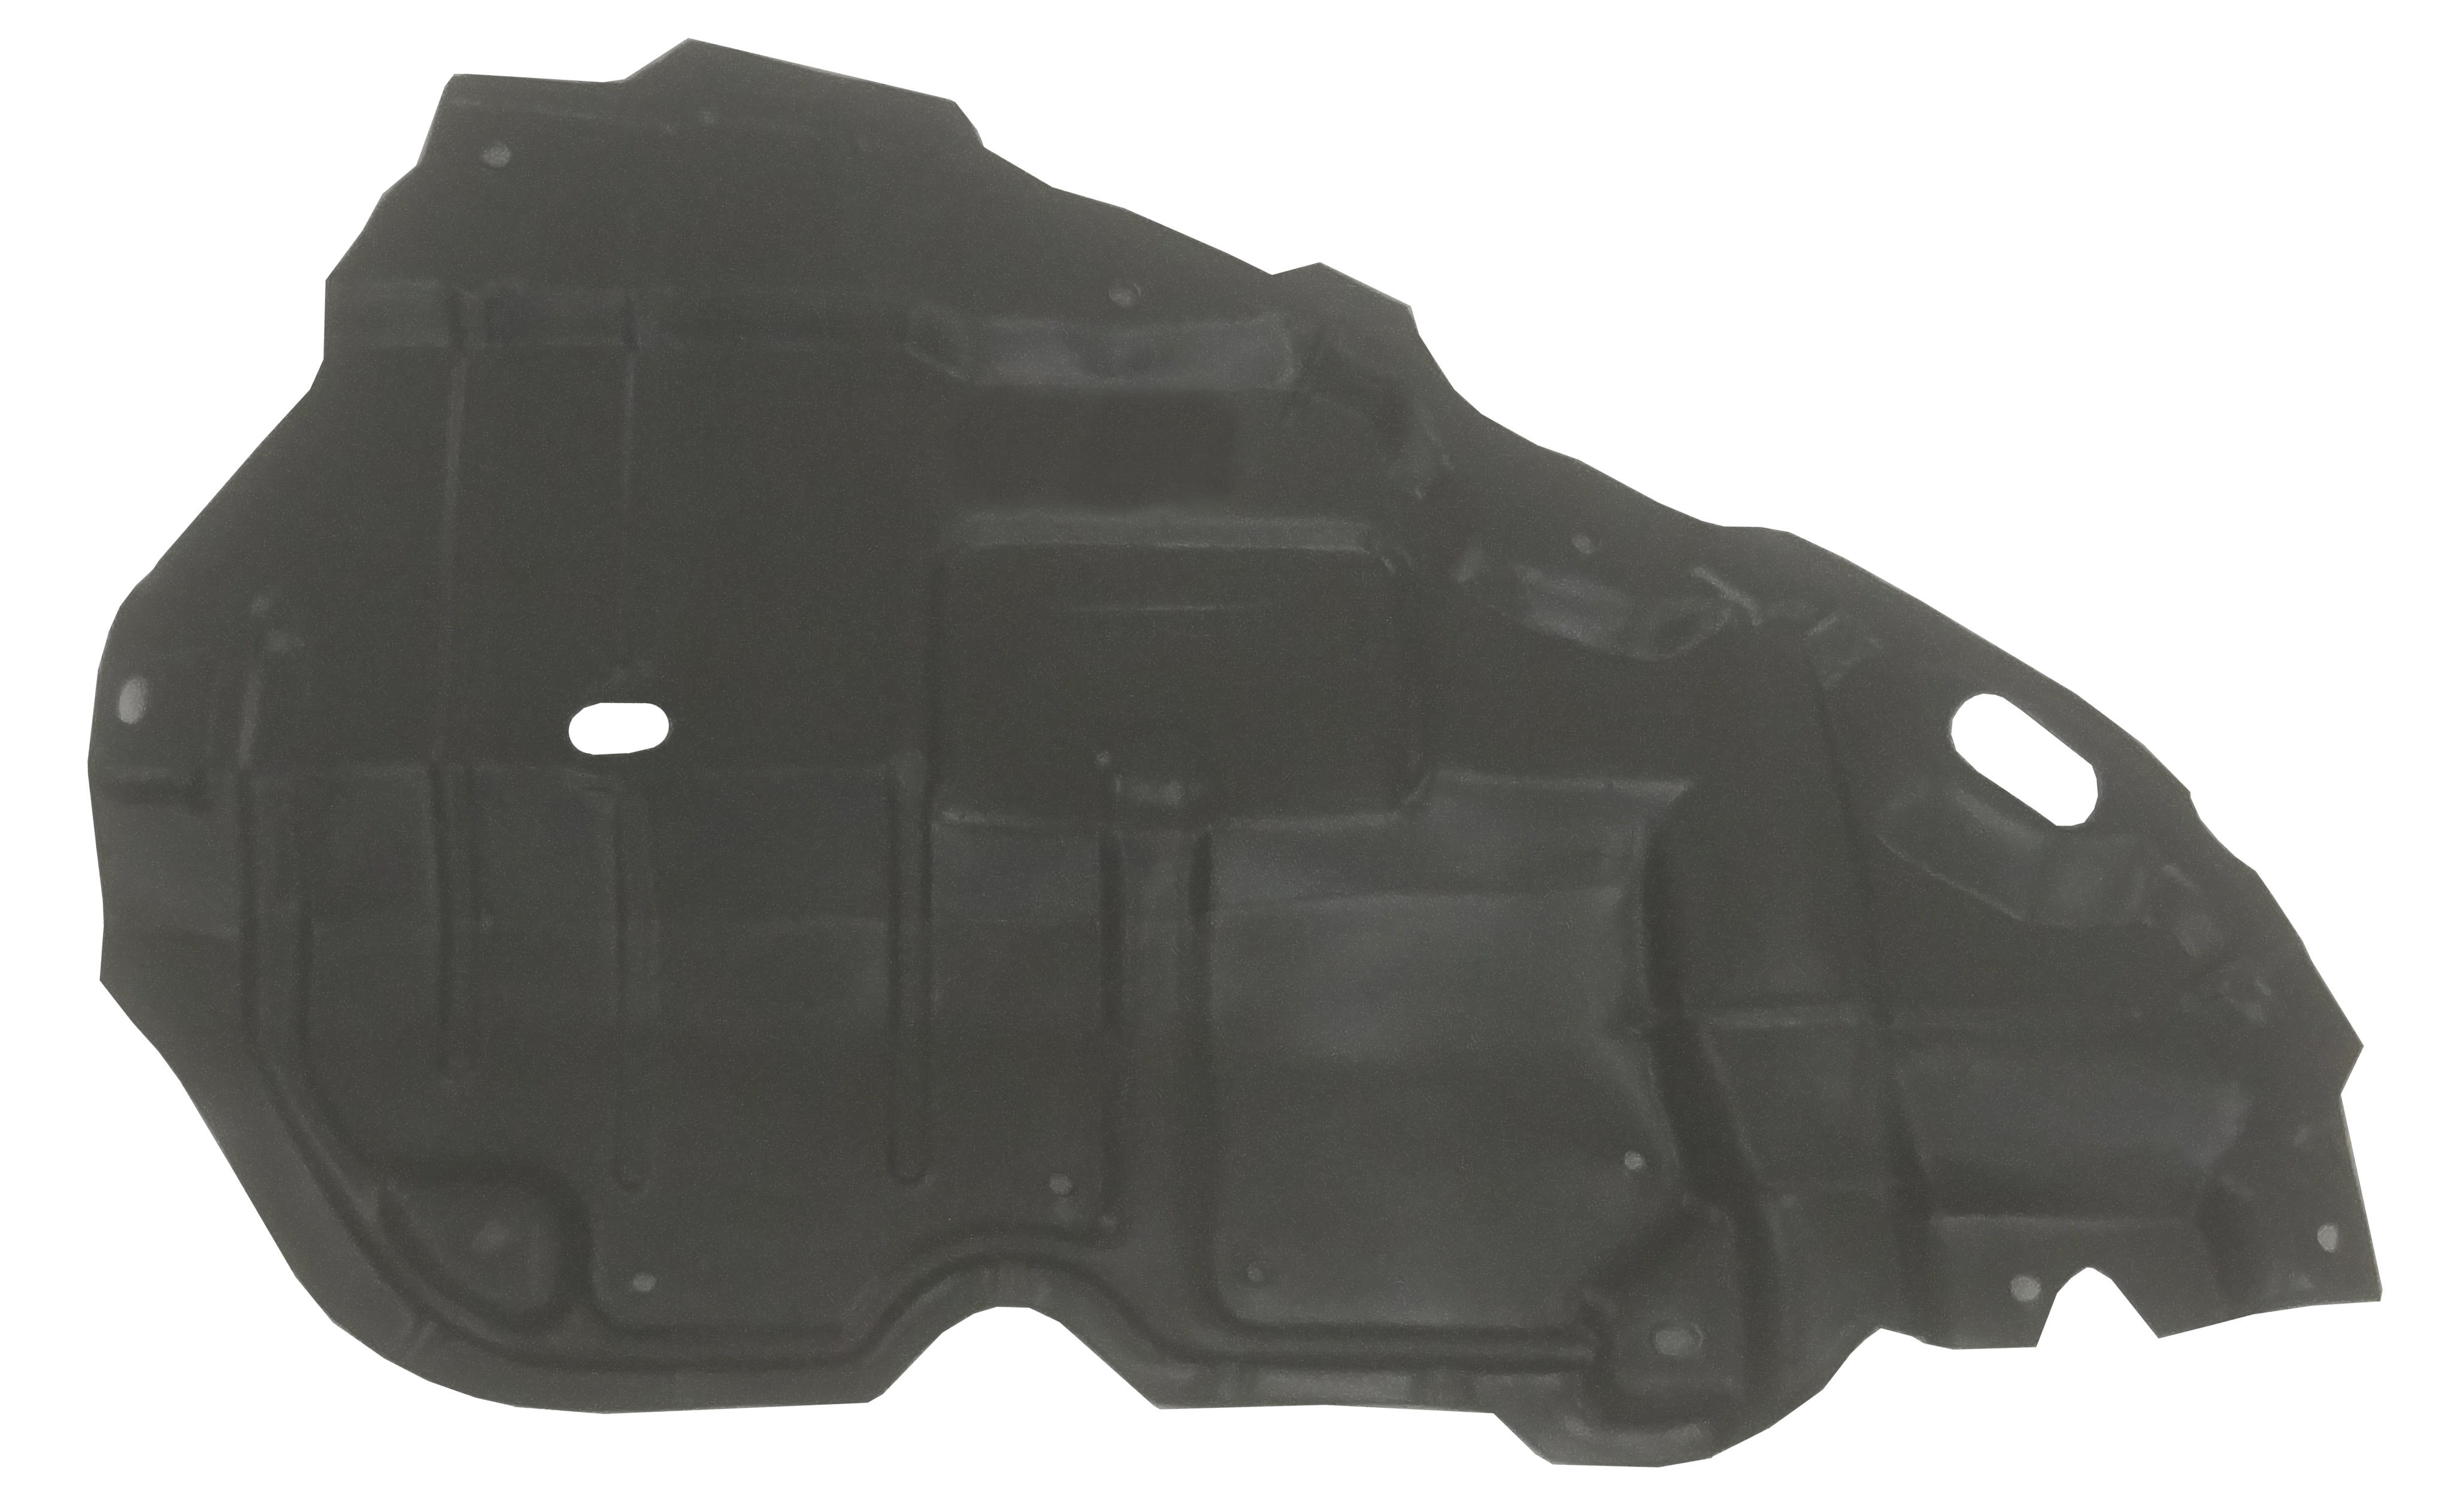 Aftermarket UNDER ENGINE COVERS for TOYOTA - CAMRY, CAMRY,07-11,Lower engine cover